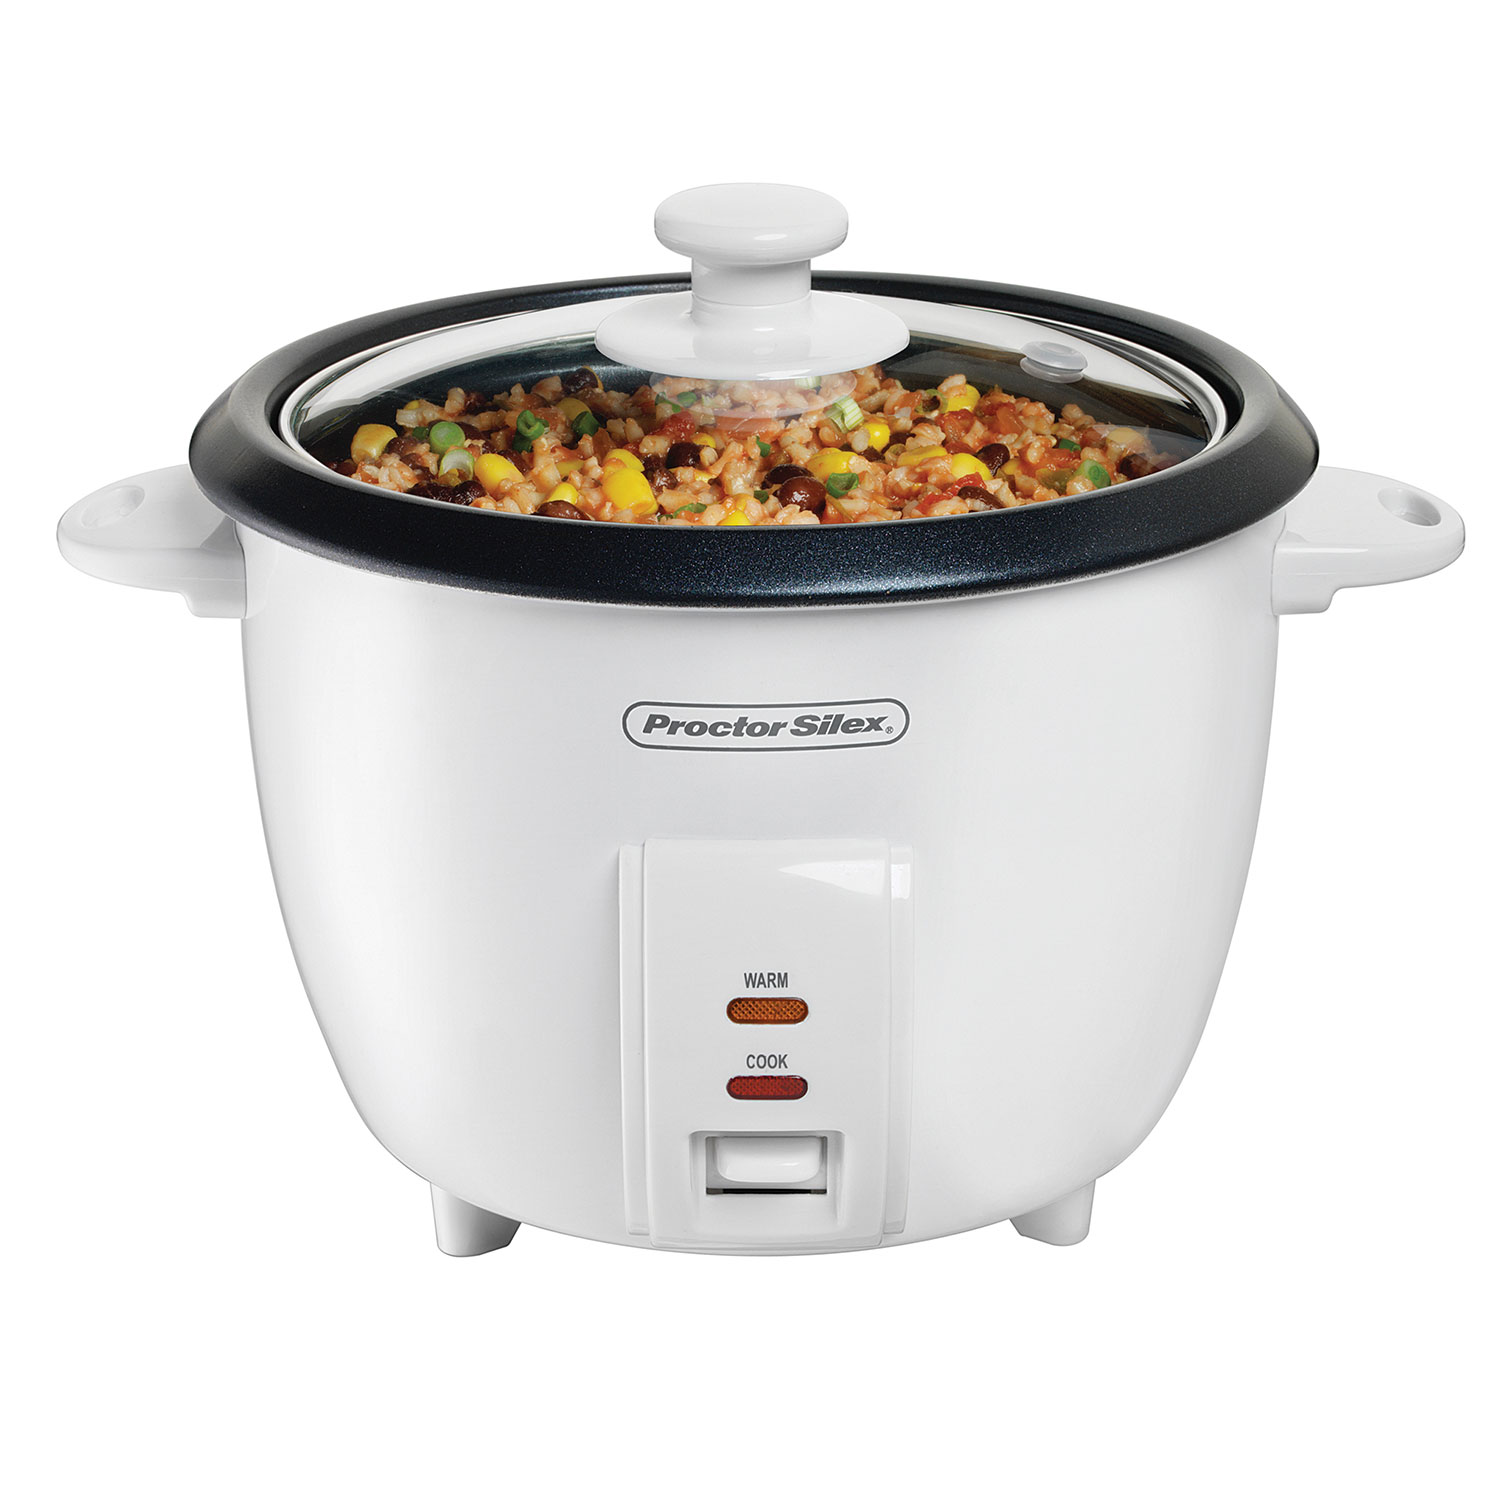 10 Cup Capacity (Cooked) Rice Cooker with Steam Basket - Model 37533NR